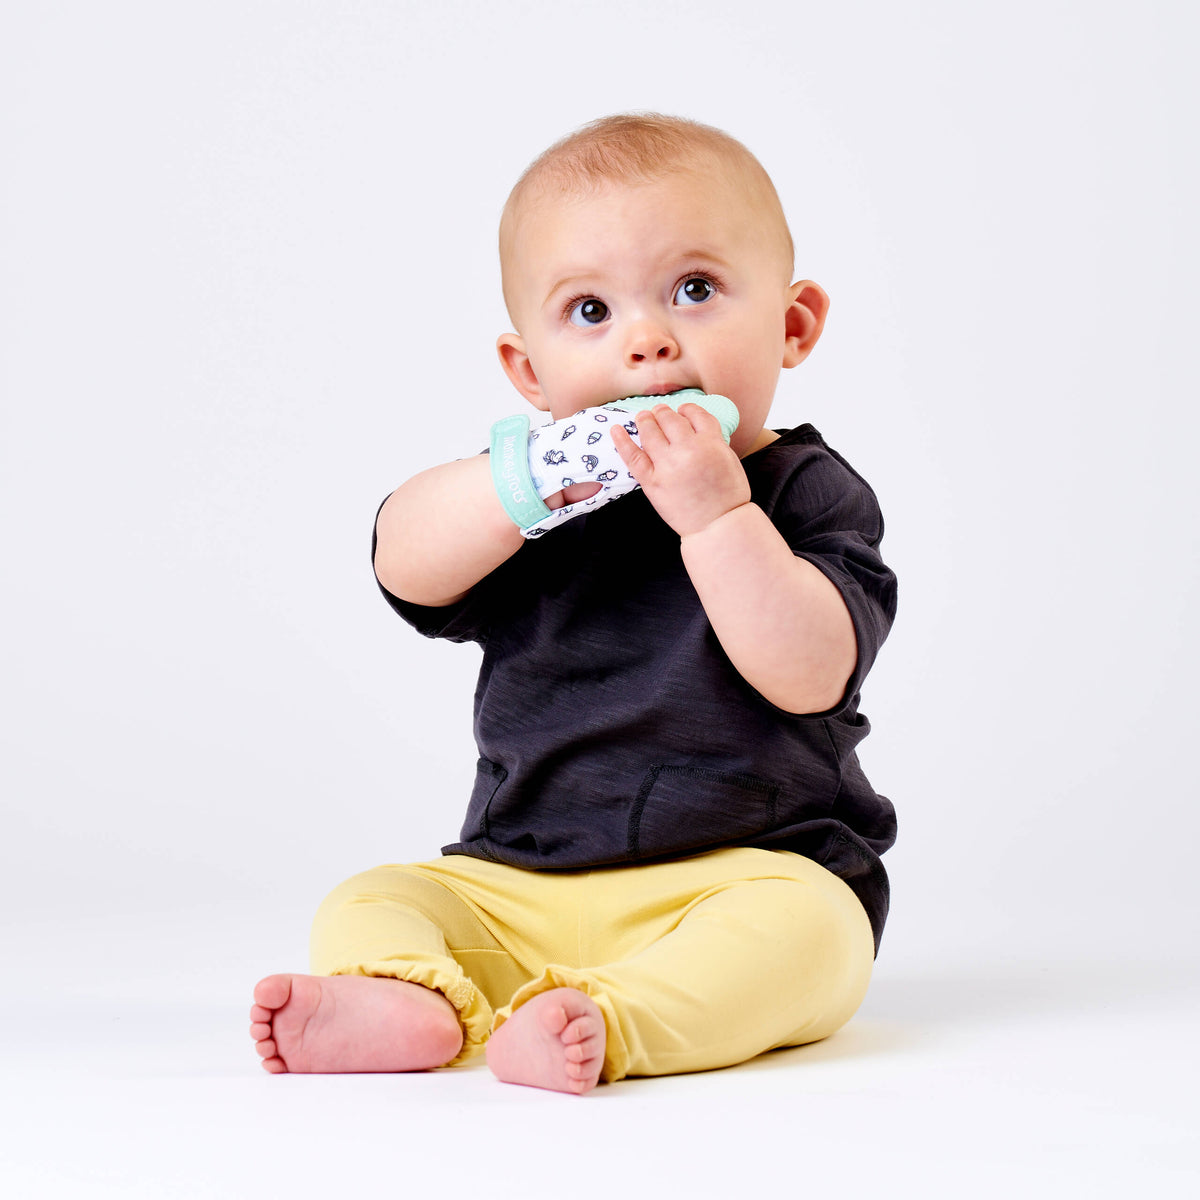 The UK's most popular baby teething mitten